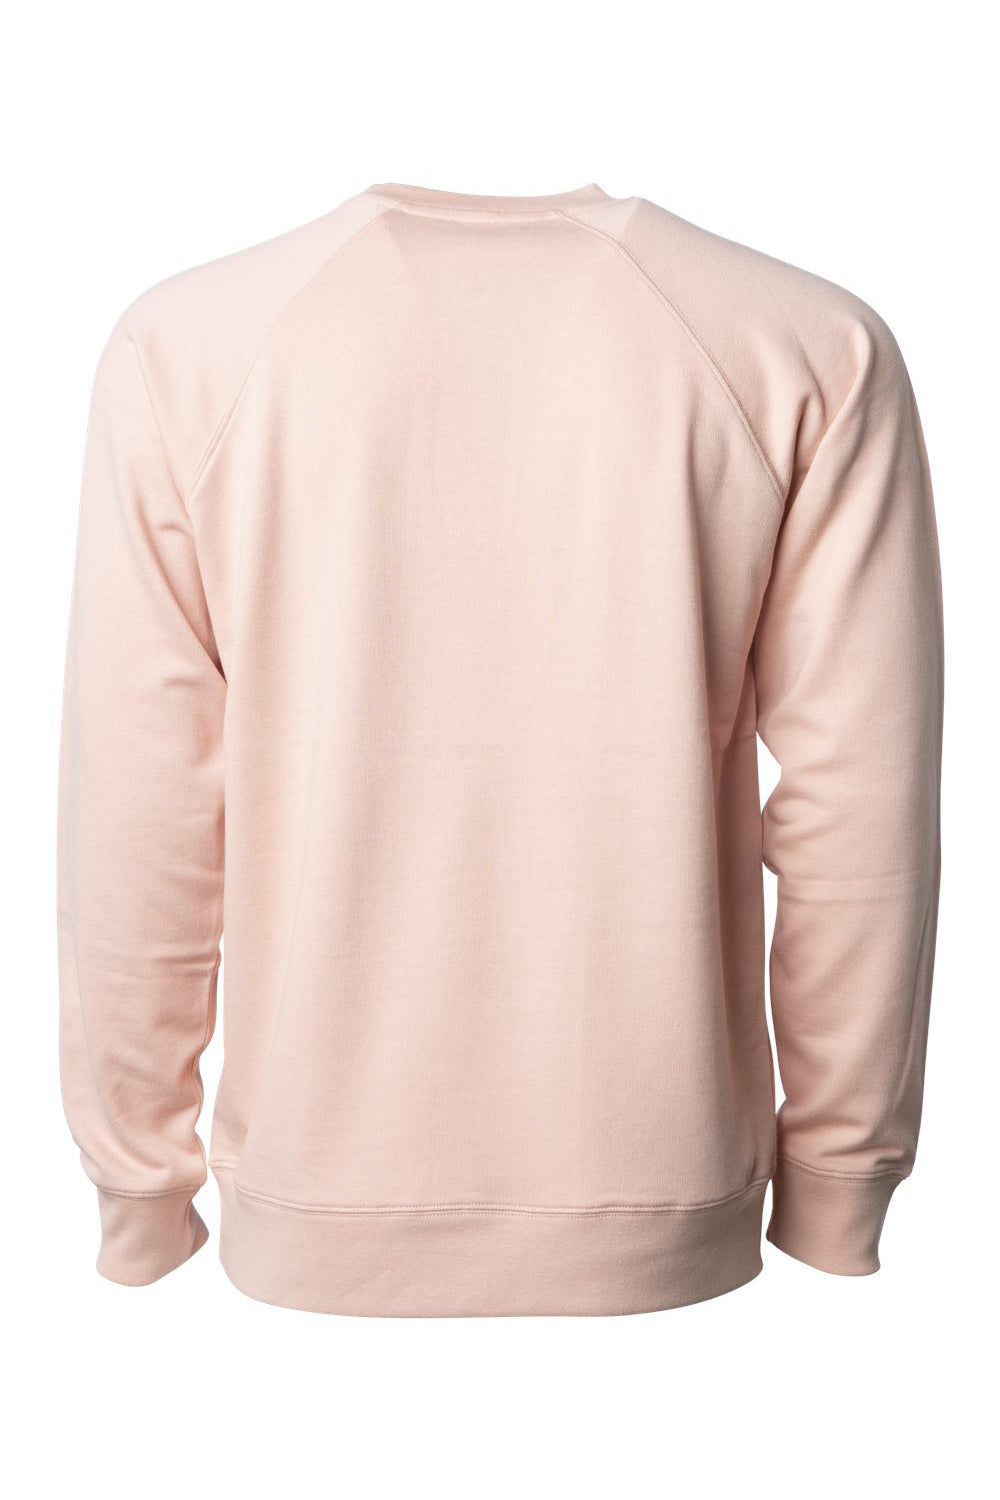 Independent Trading Co. SS1000C Mens Icon Loopback Terry Crewneck Sweatshirt Rose Pink Flat Back